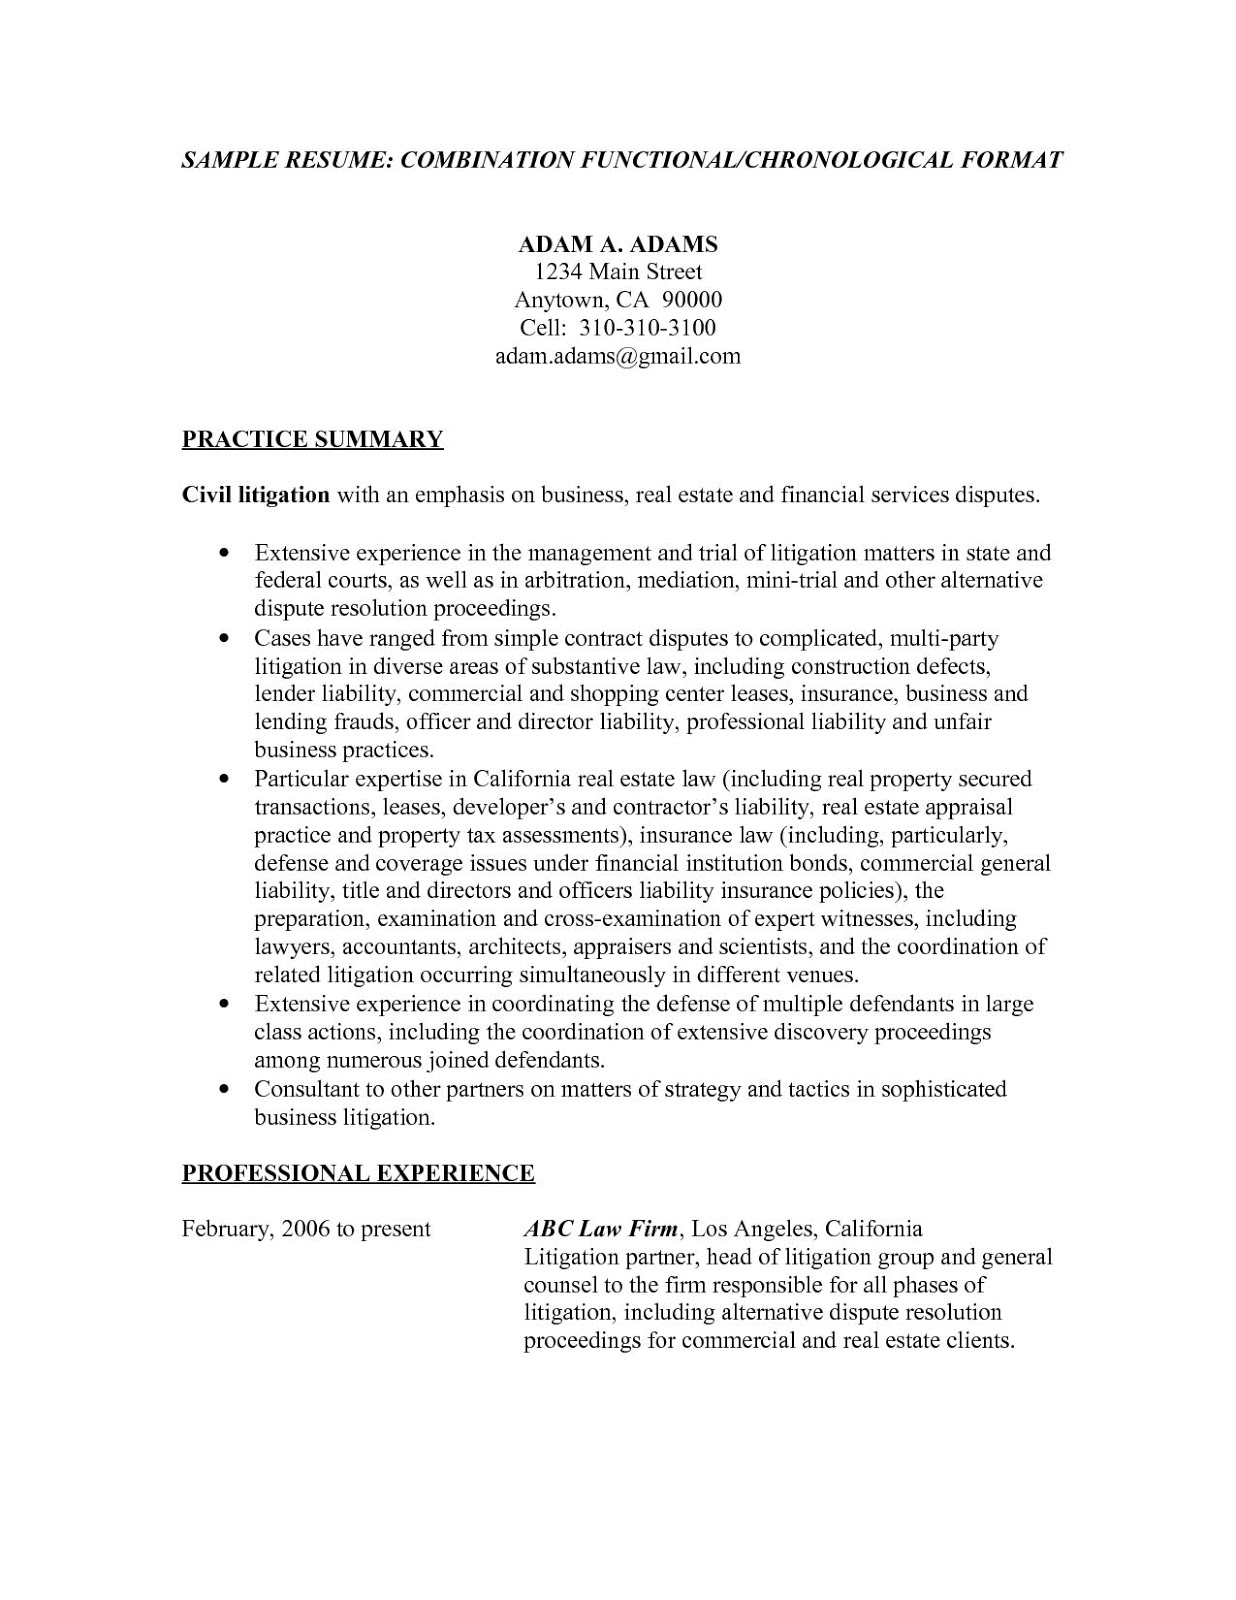 a good resume title a good resume title for customer service what is a good resume title for careerbuilder example of a good resume title a good title for a resume what would be a good resume title good resume title examples good resume title for warehouse worker good resume title for freshers good resume title for administrative assistant good resume title for monster good resume title for receptionist good resume